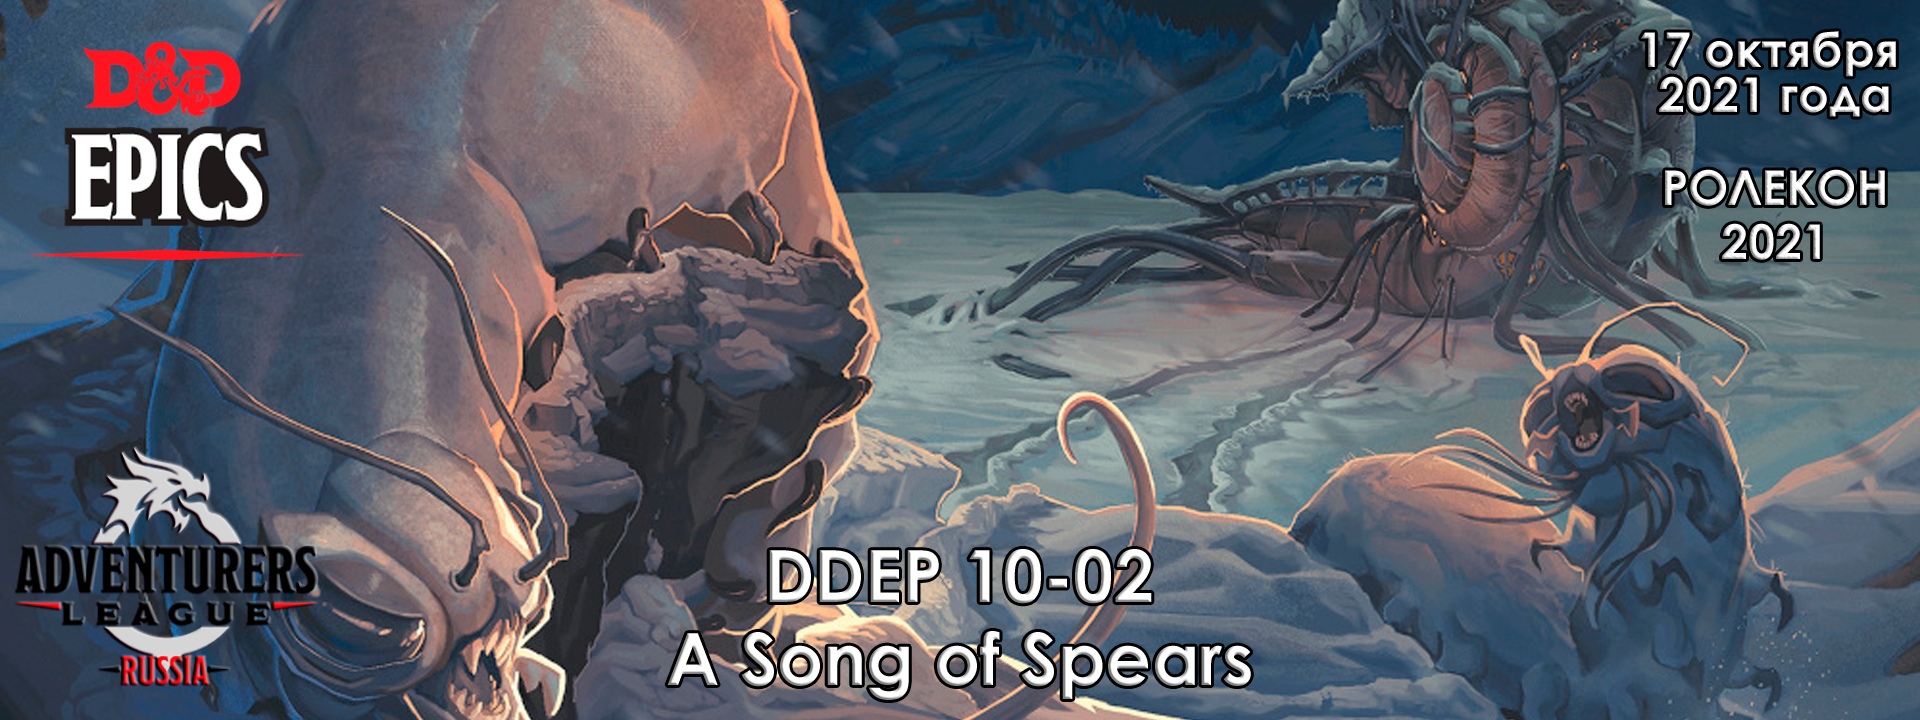 DDEP10-02 A Song of Spears [T2]